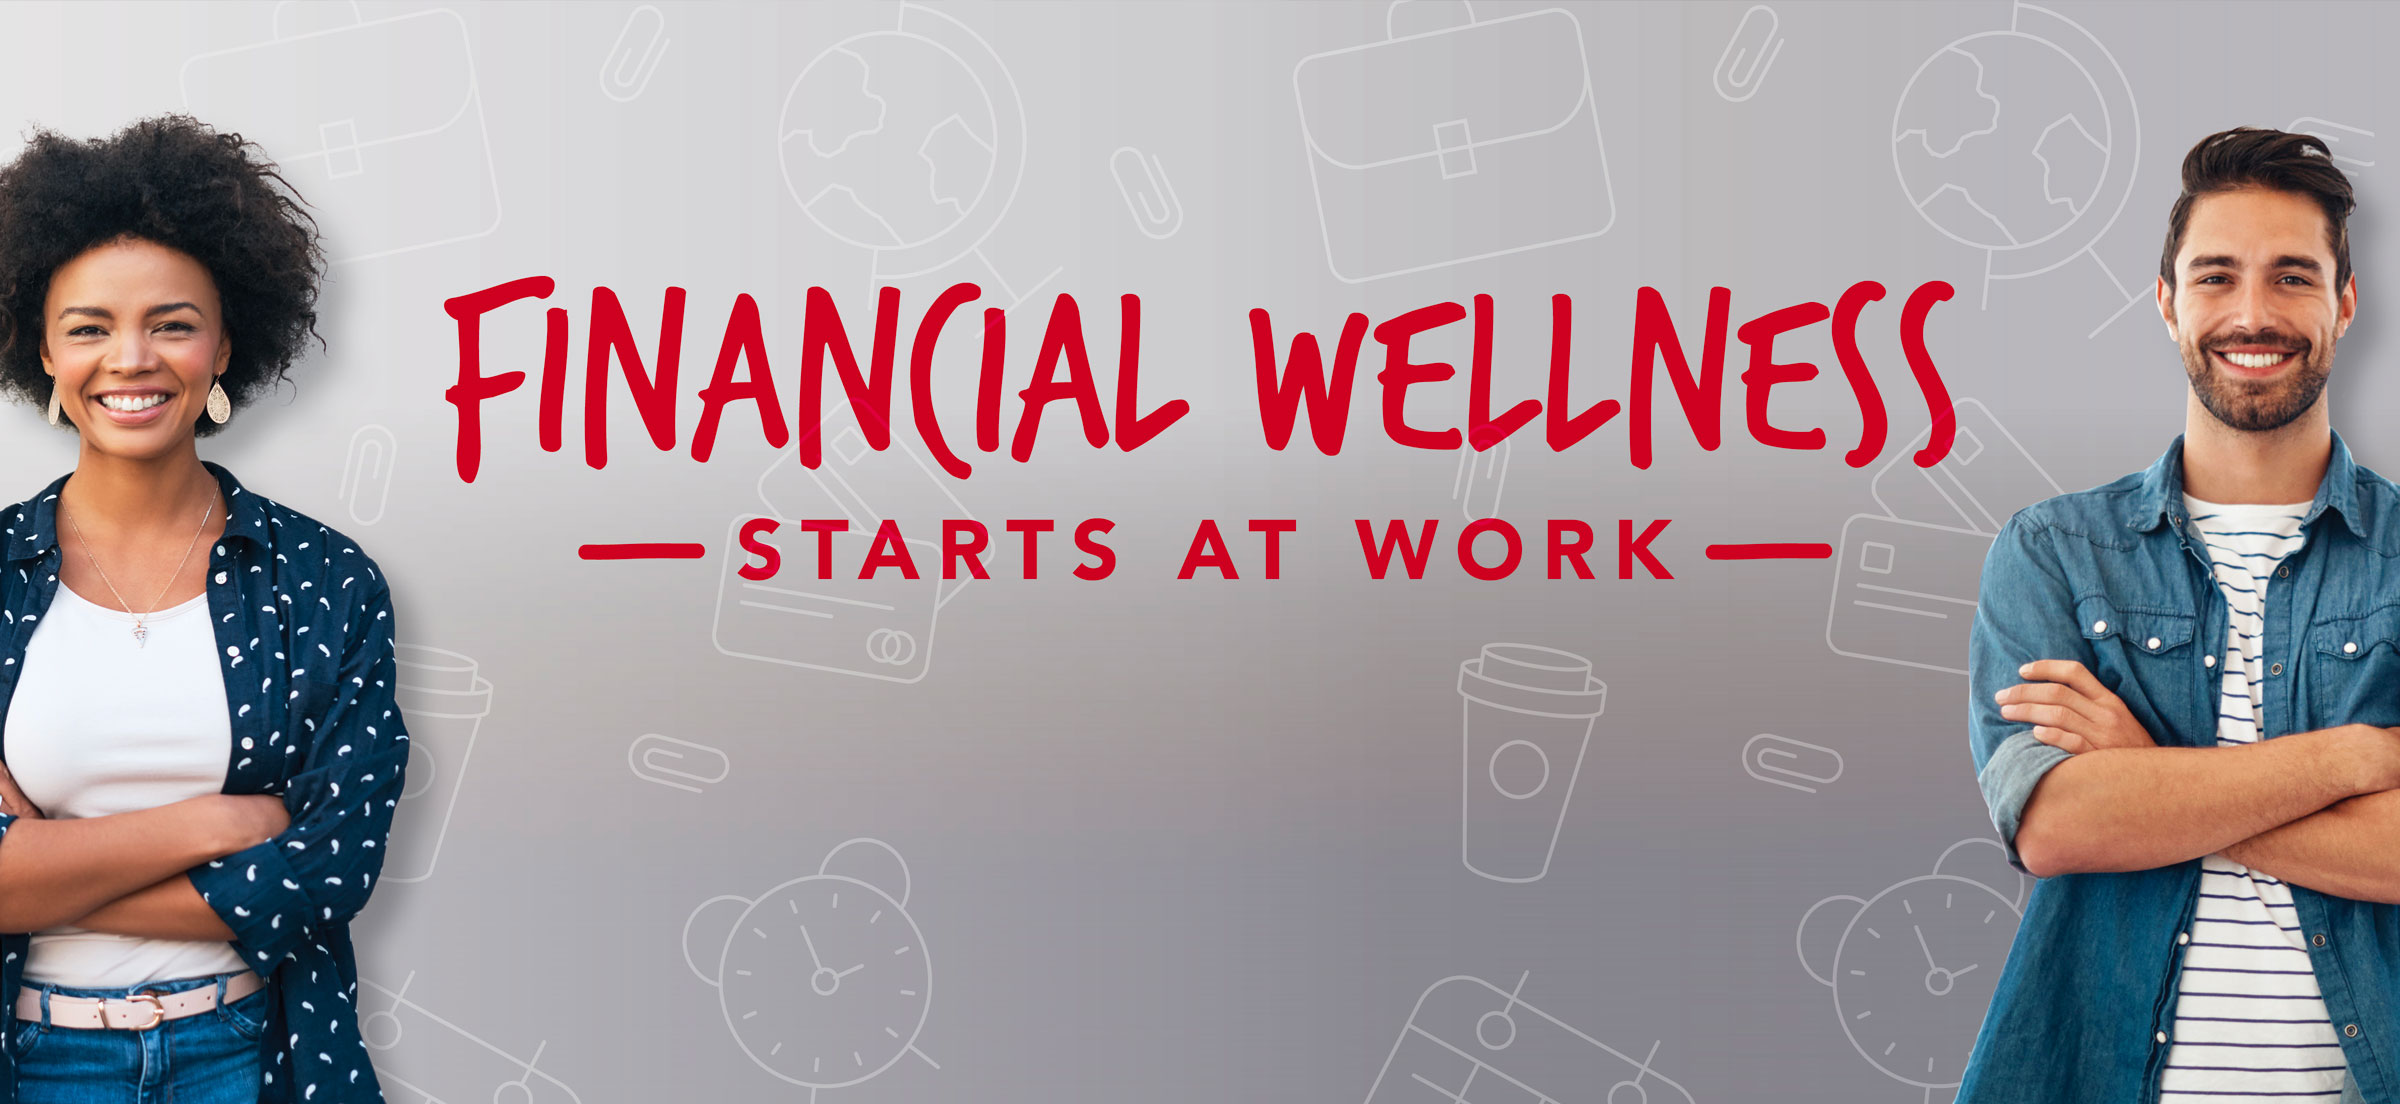 Woman and man smiling with crossed arms. Financial Wellness headline between them.